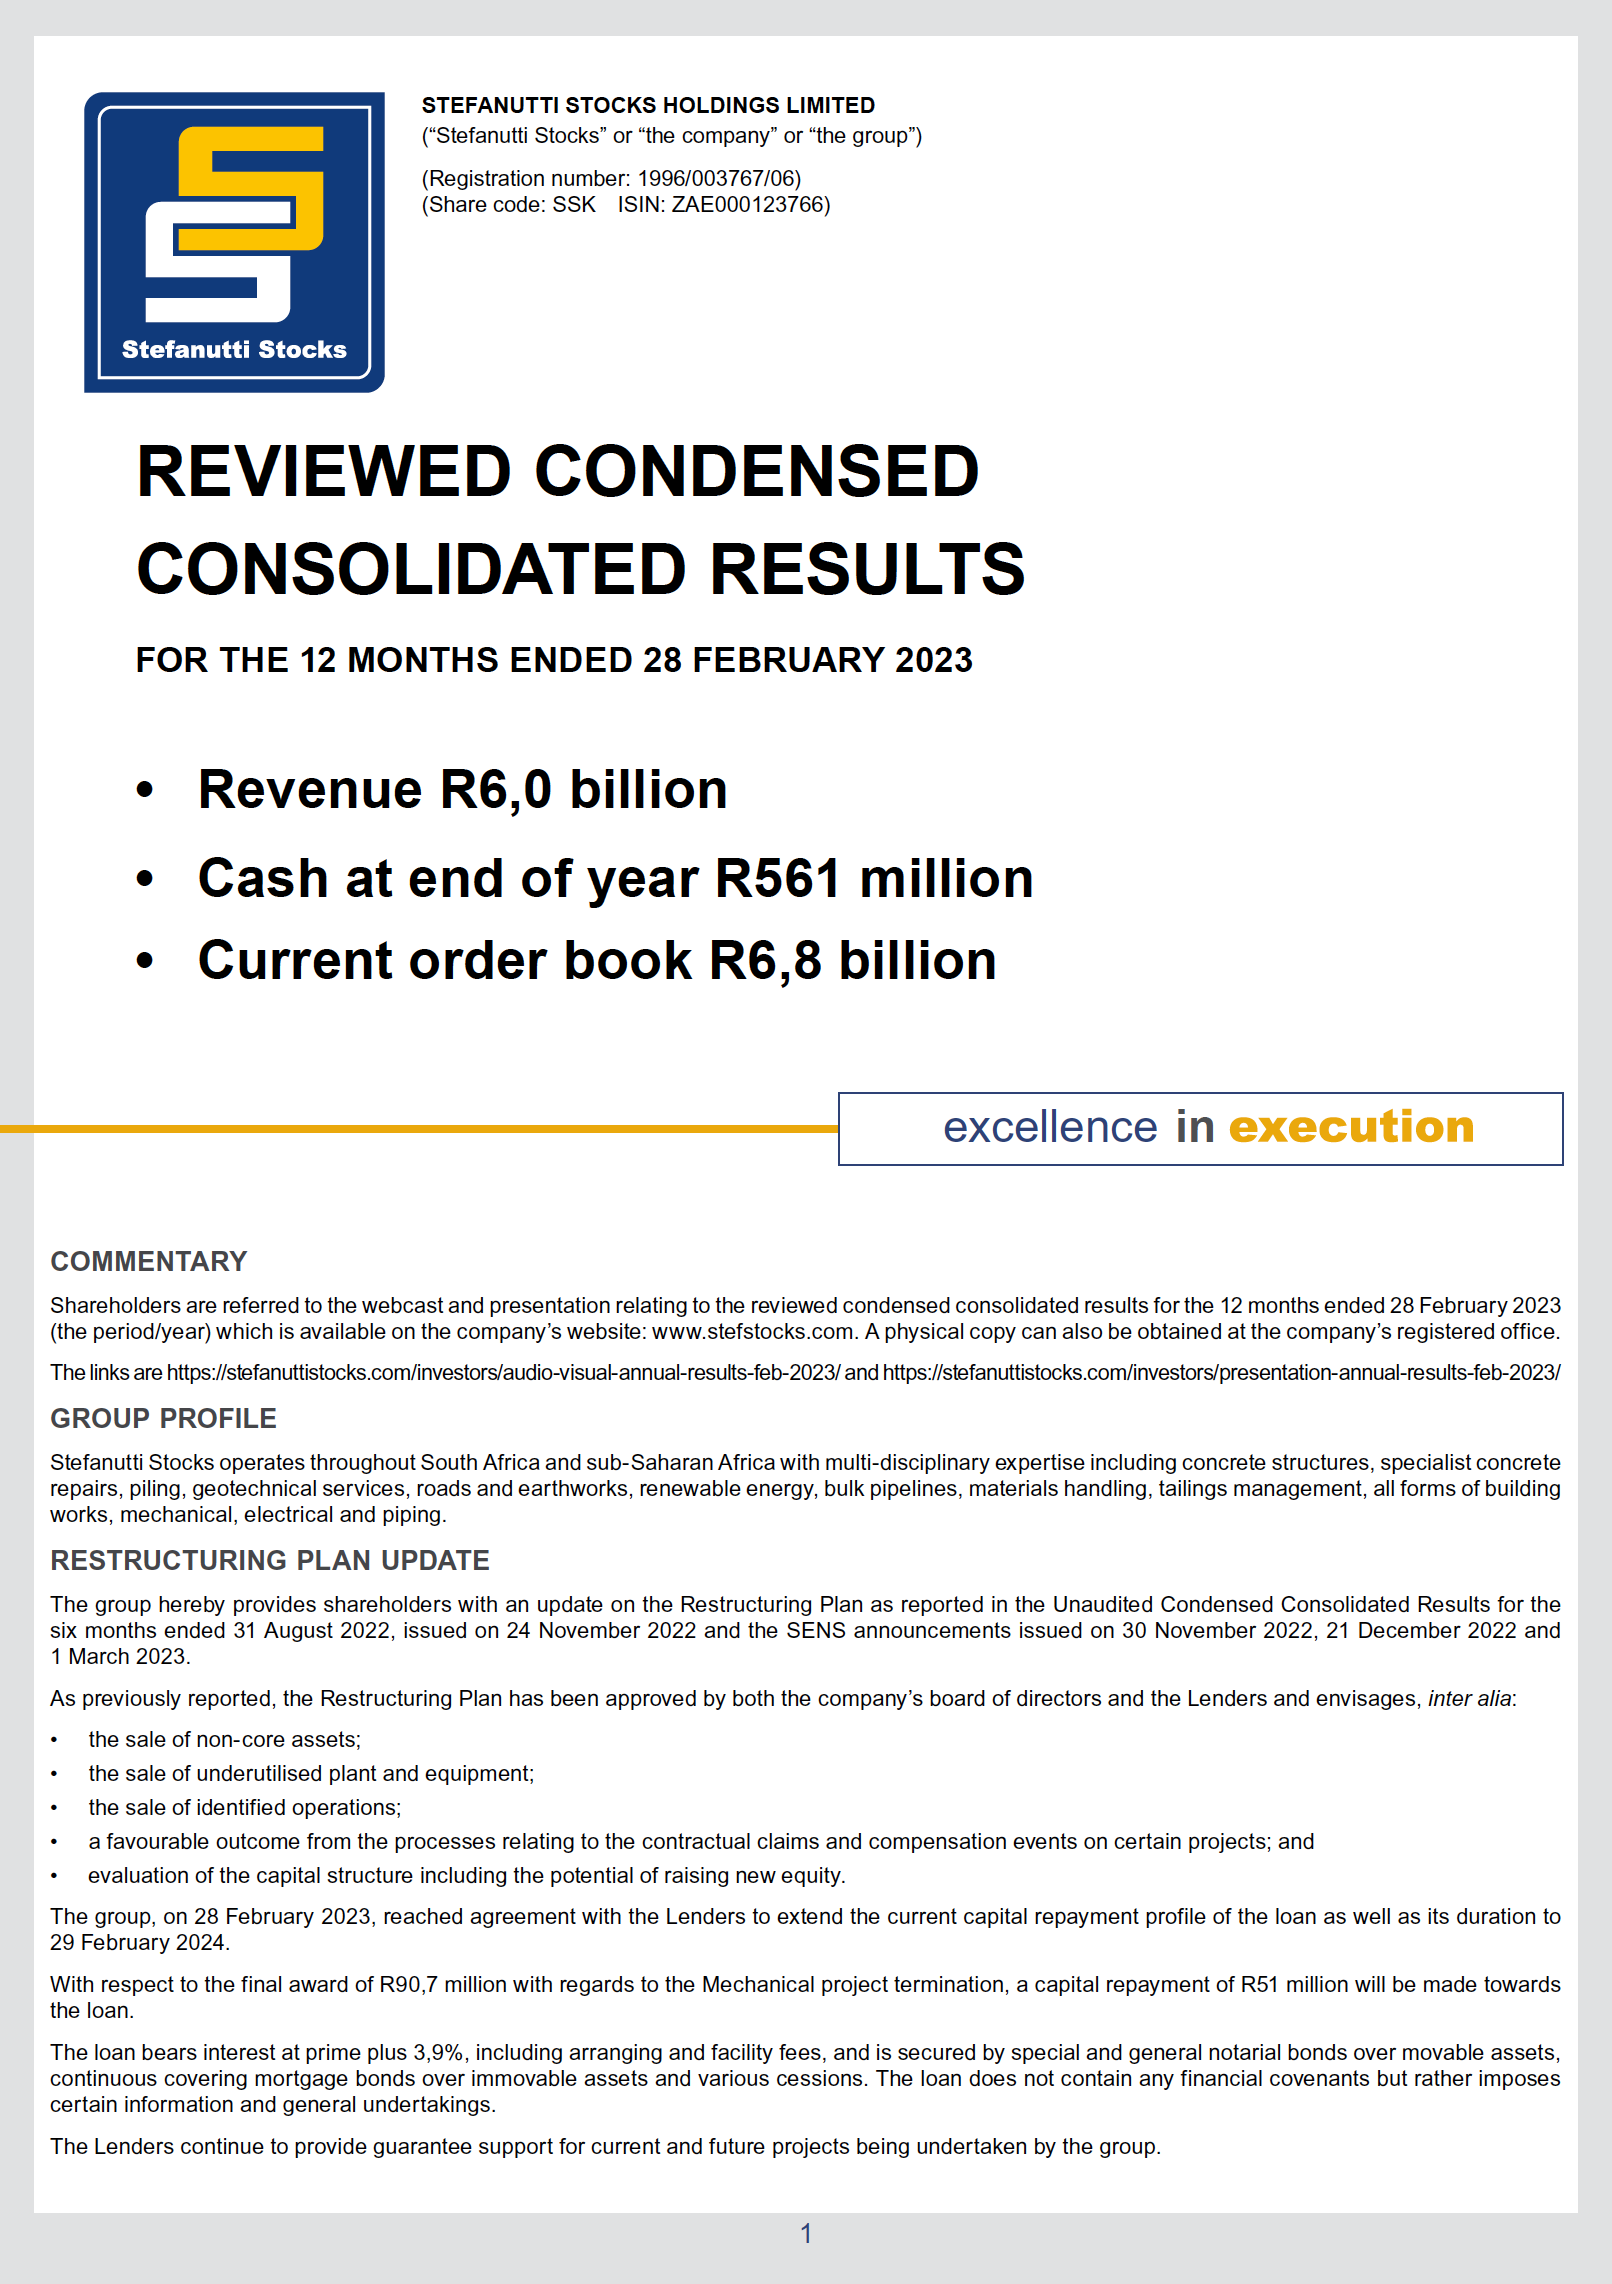 Reviewed Condensed Consolidated Results – Feb 2023